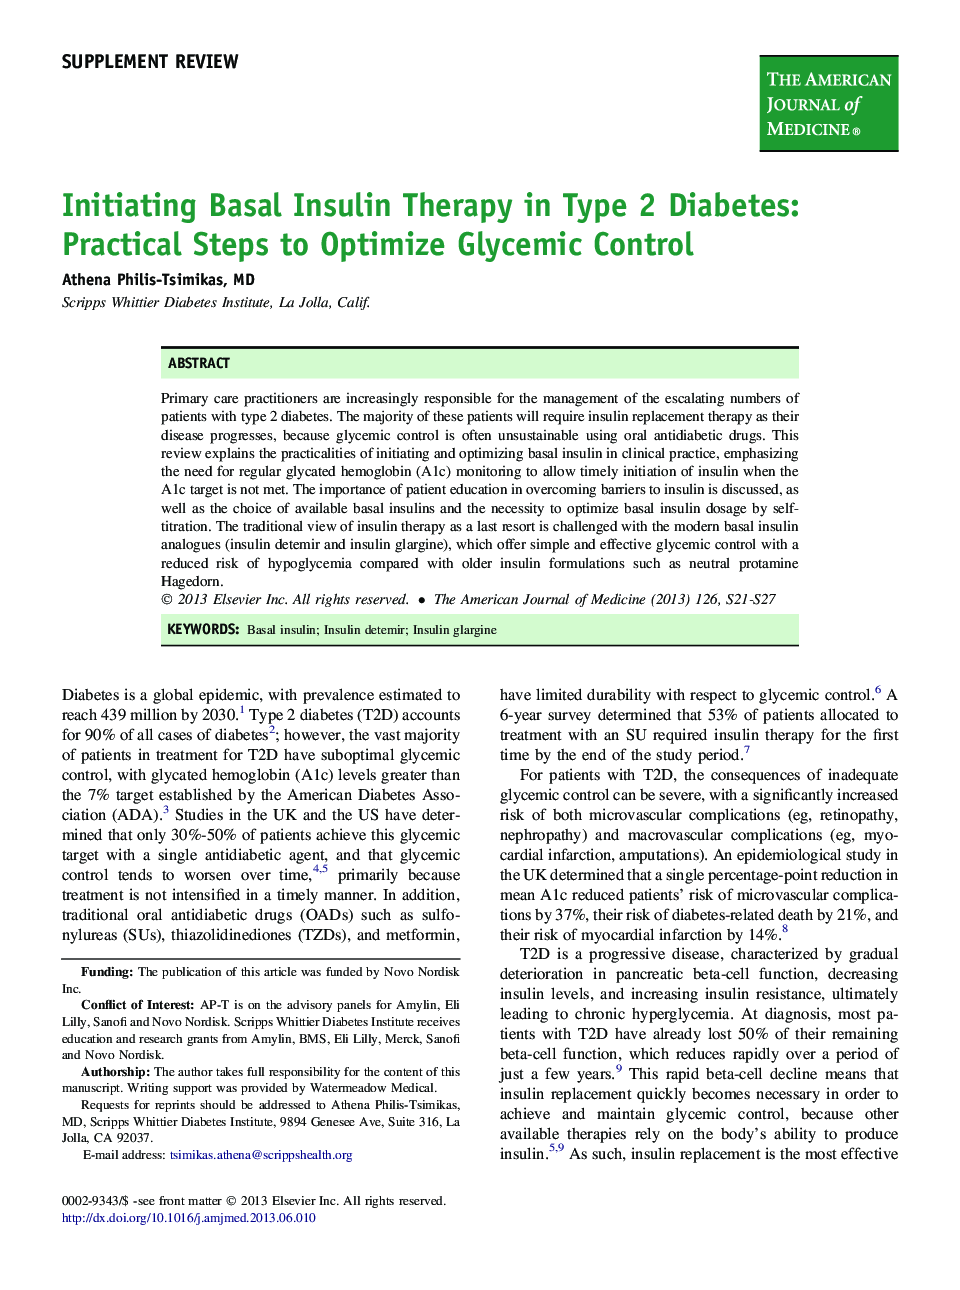 Initiating Basal Insulin Therapy in Type 2 Diabetes: Practical Steps to Optimize Glycemic Control 